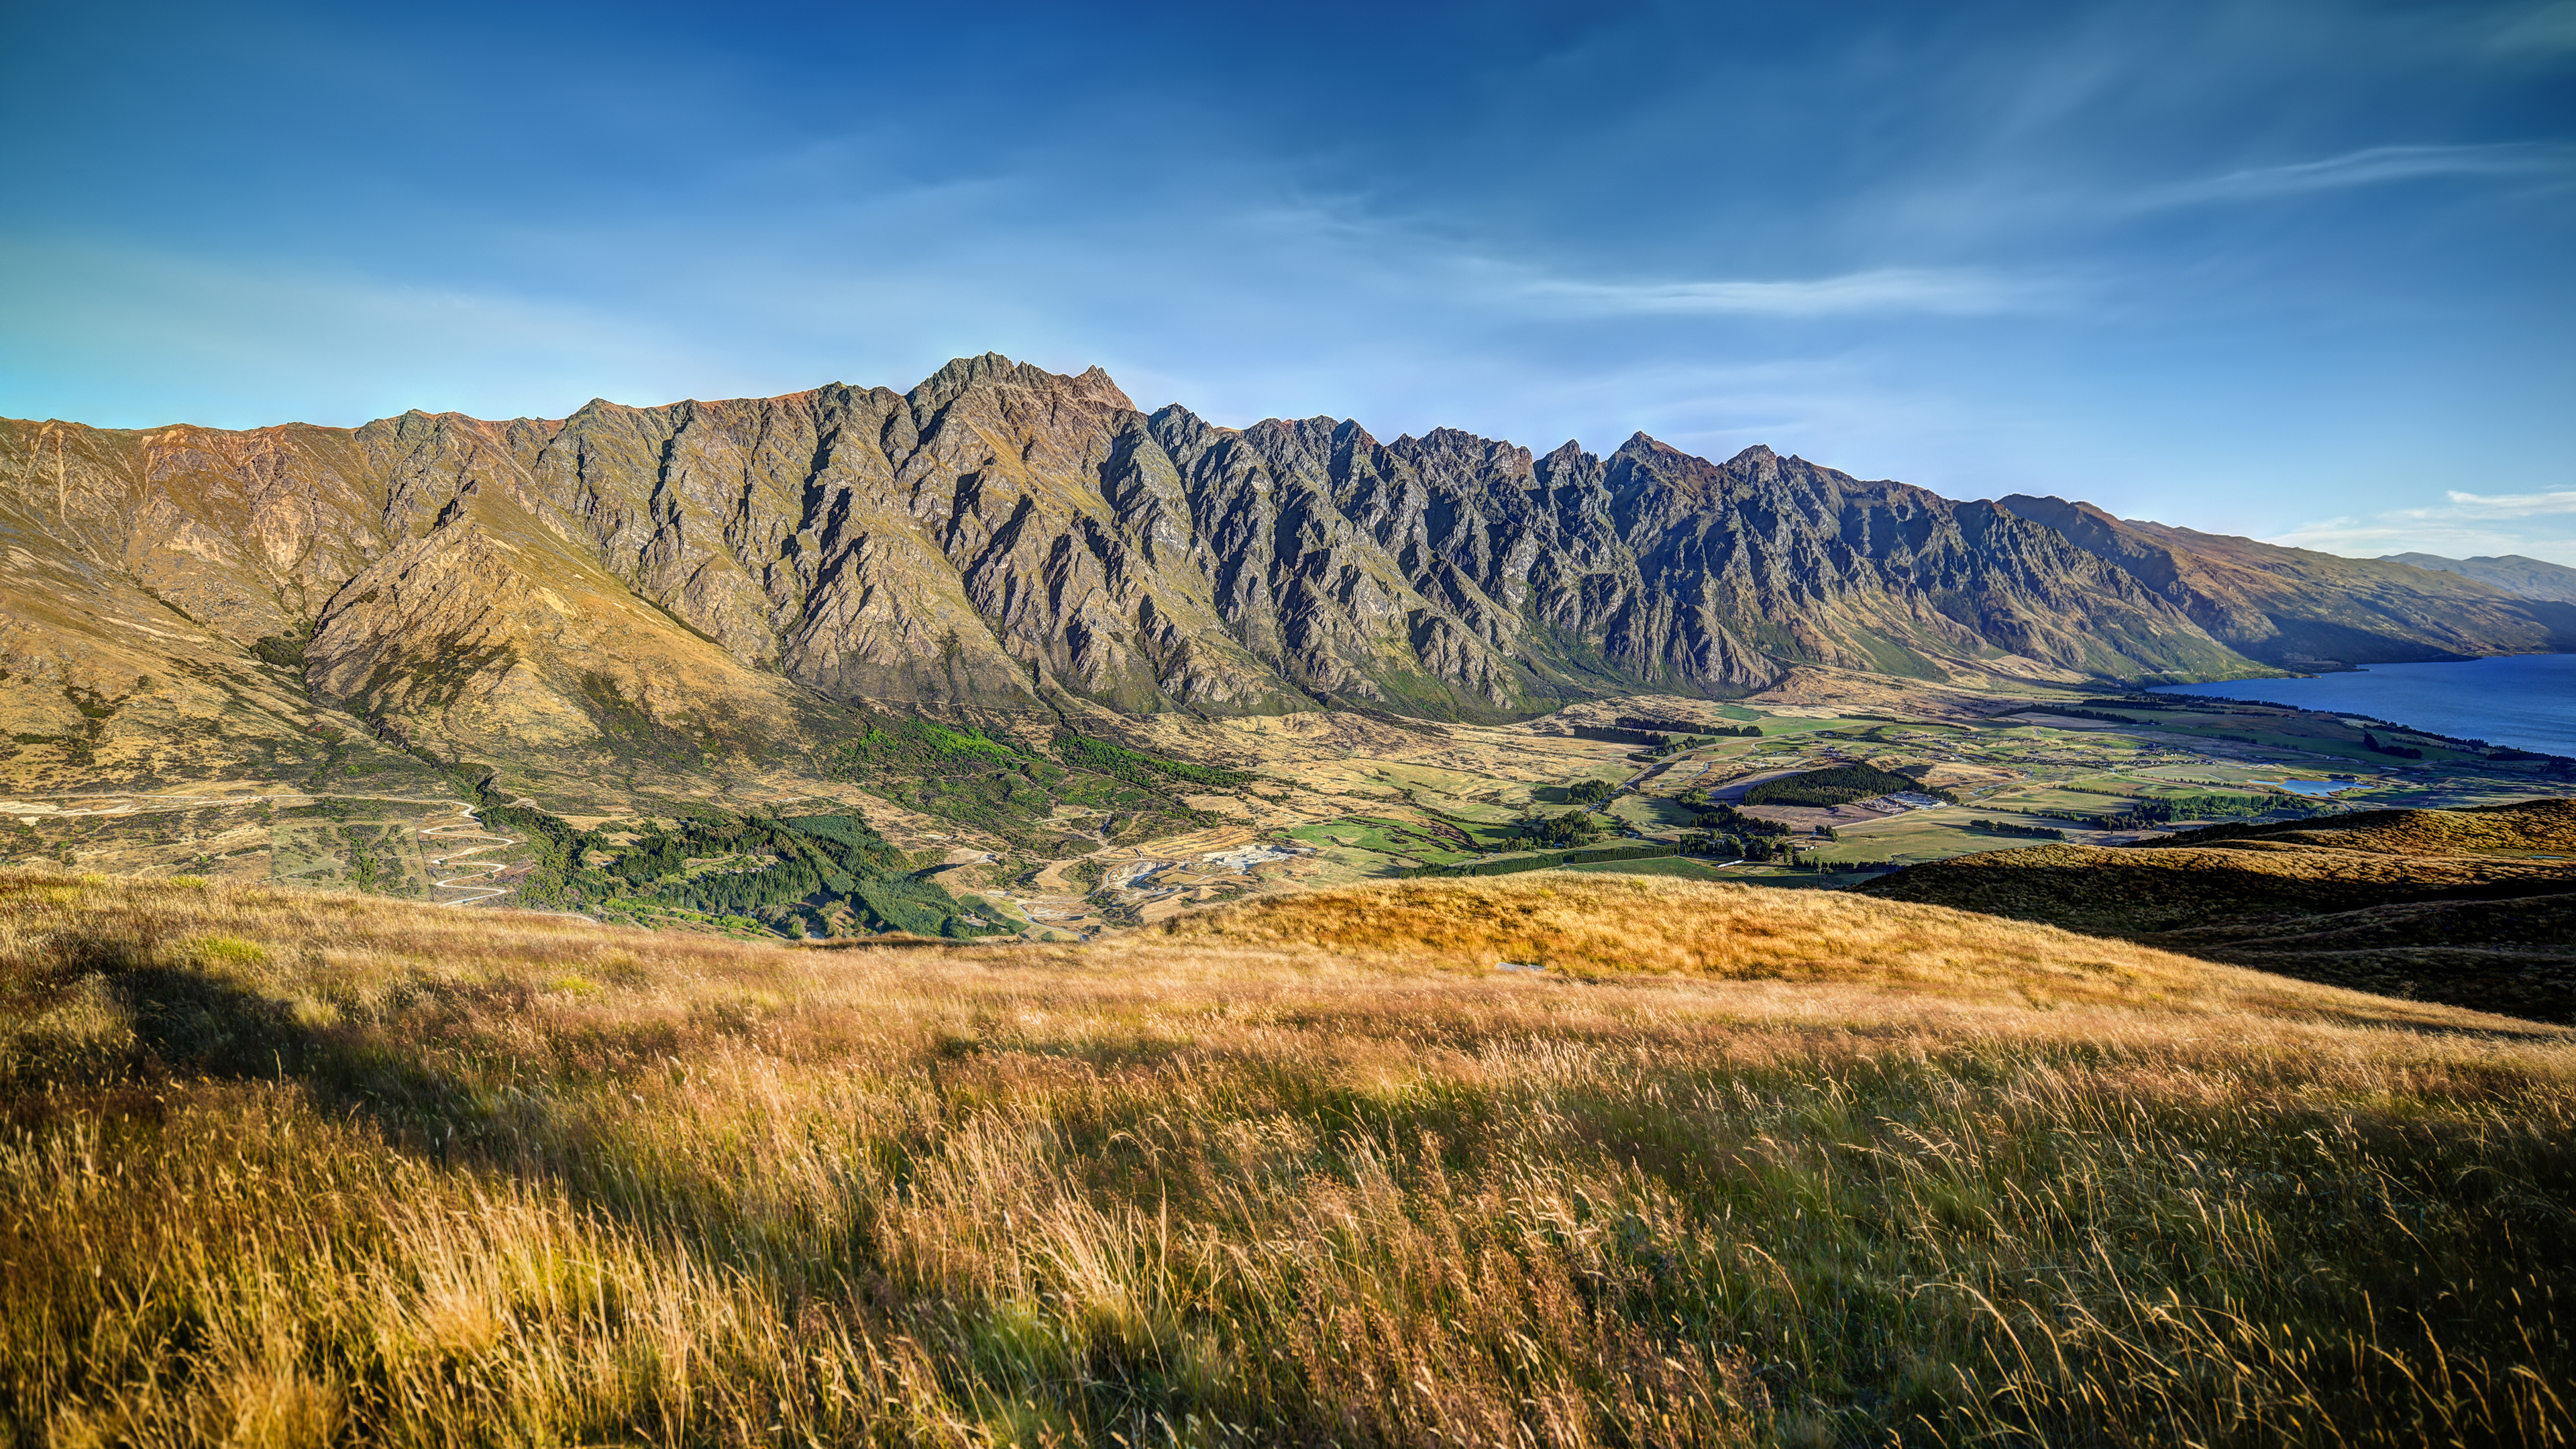 General 3840x2160 landscape 4K mountains field water road valley New Zealand Queenstown nature